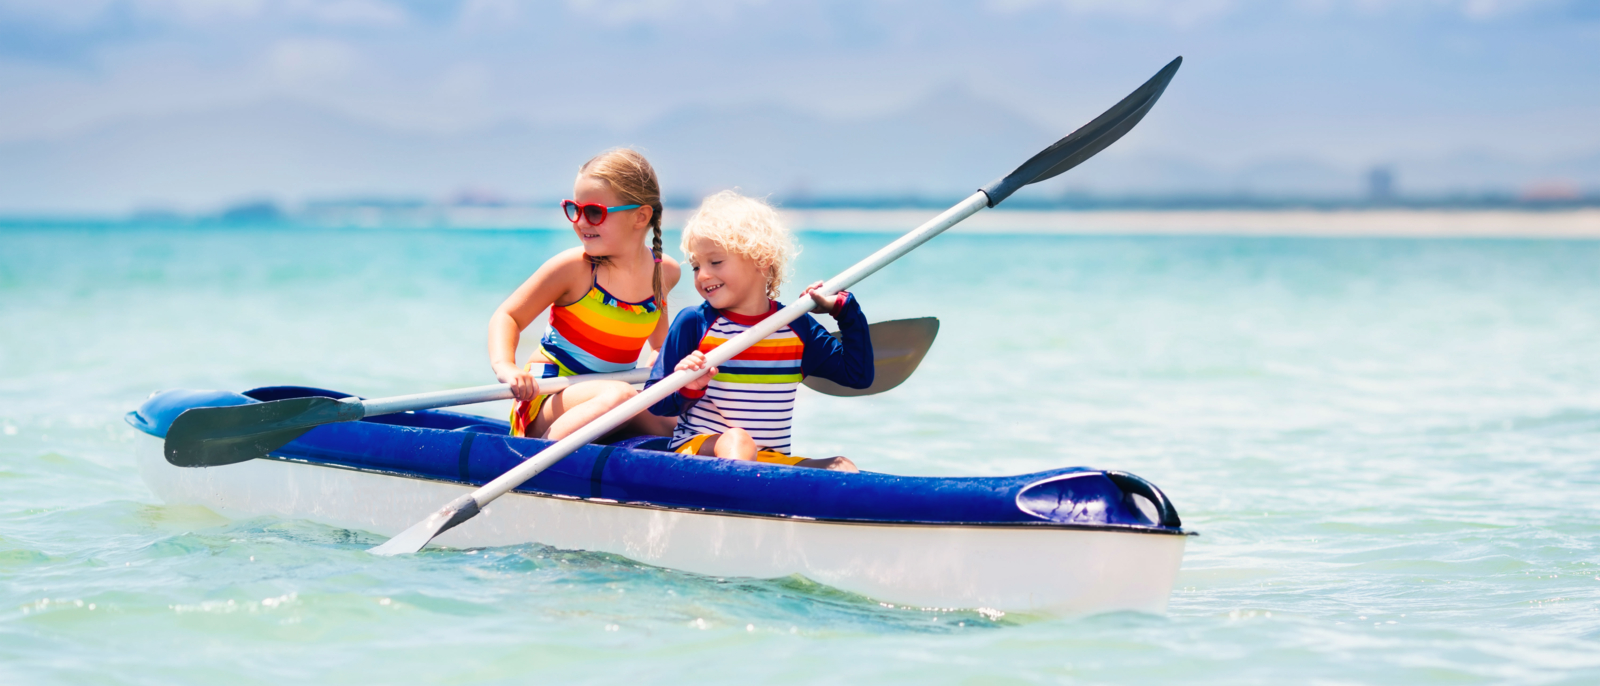 Kids kayaking in ocean. Children in kayak in tropical sea. Active vacation with young kid. Boy and girl in canoe on beautiful beach. Holiday activity with preschool child. Family summer fun.